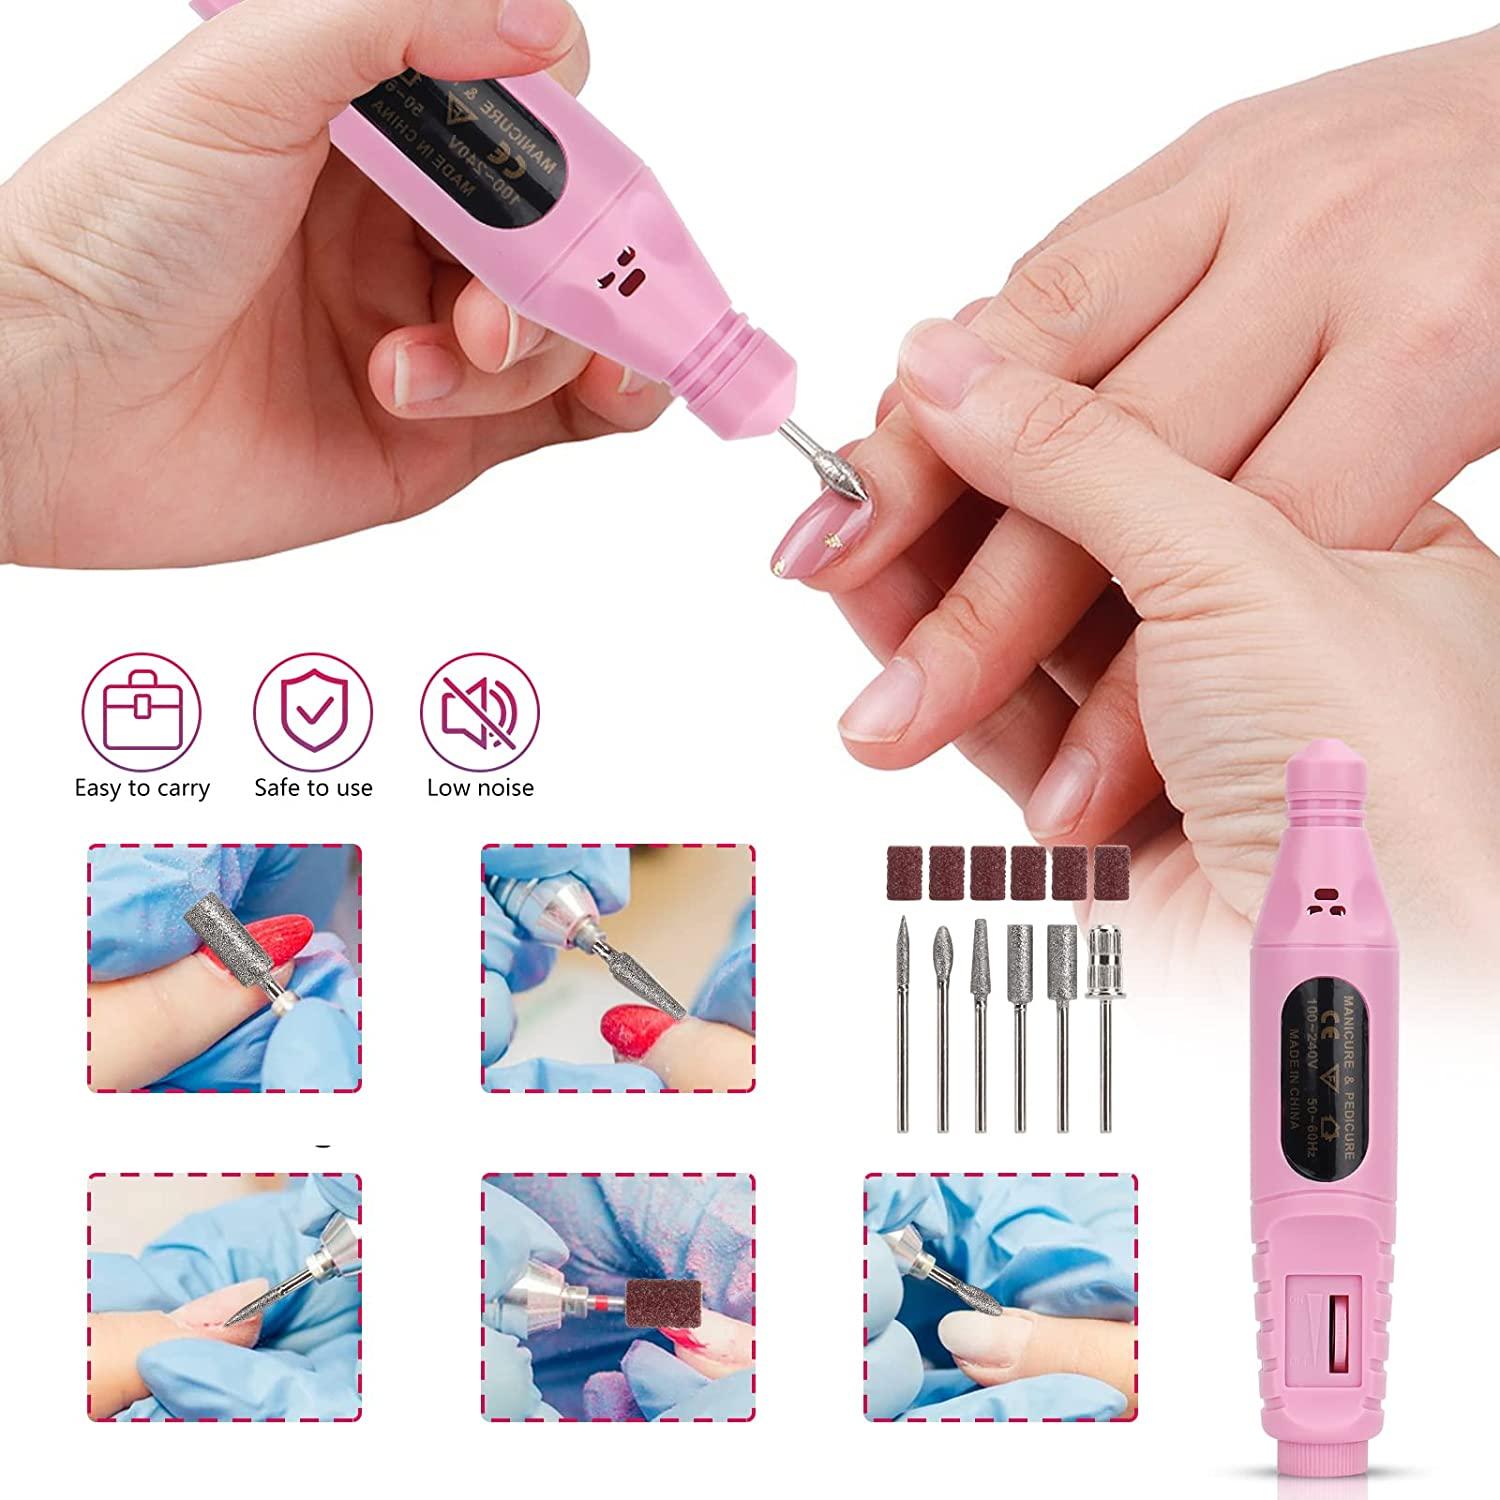 Nail Practice Hand for Acrylic Nails, Flexible Nail Hand Practice Training  Kits, Rubber Fake Nail Hand to Practice Fake Nails with Nail Drill, Nail  Dryer Lamp, 12 Colors Acrylic Powder Beginners Kit